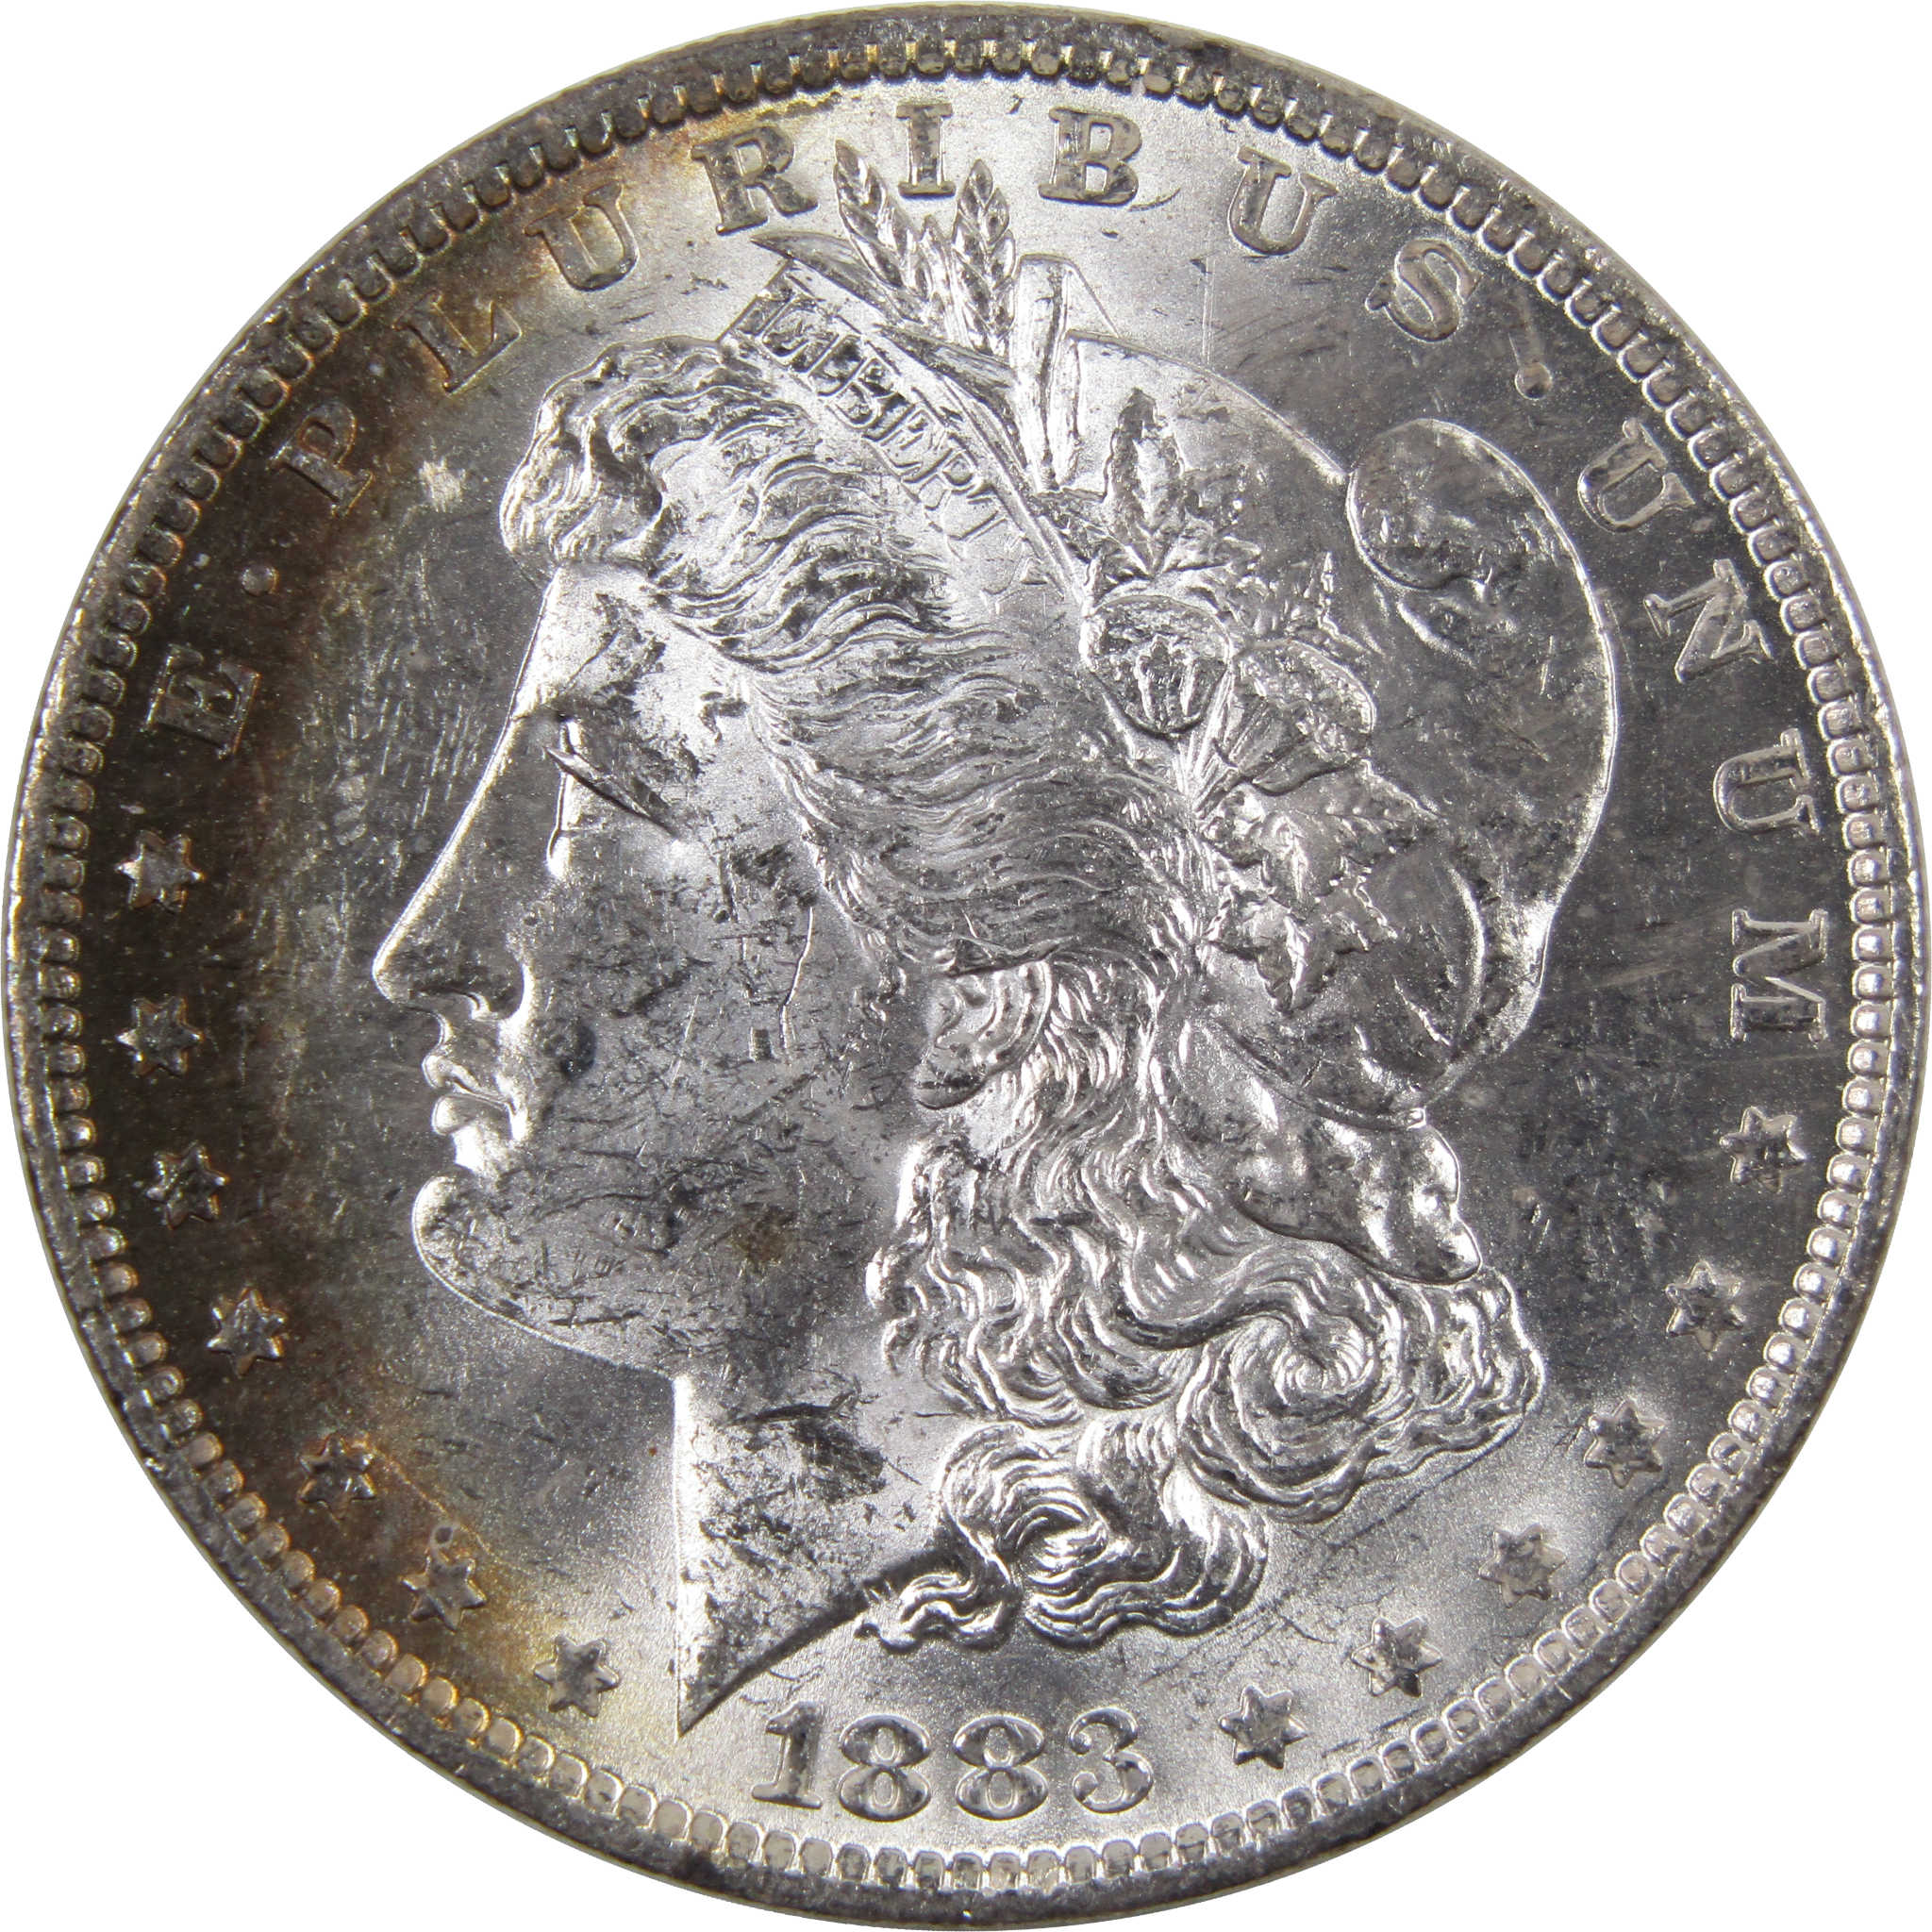 1883 O Morgan Dollar BU Uncirculated Mint State 90% Silver SKU:I3461 - Morgan coin - Morgan silver dollar - Morgan silver dollar for sale - Profile Coins &amp; Collectibles